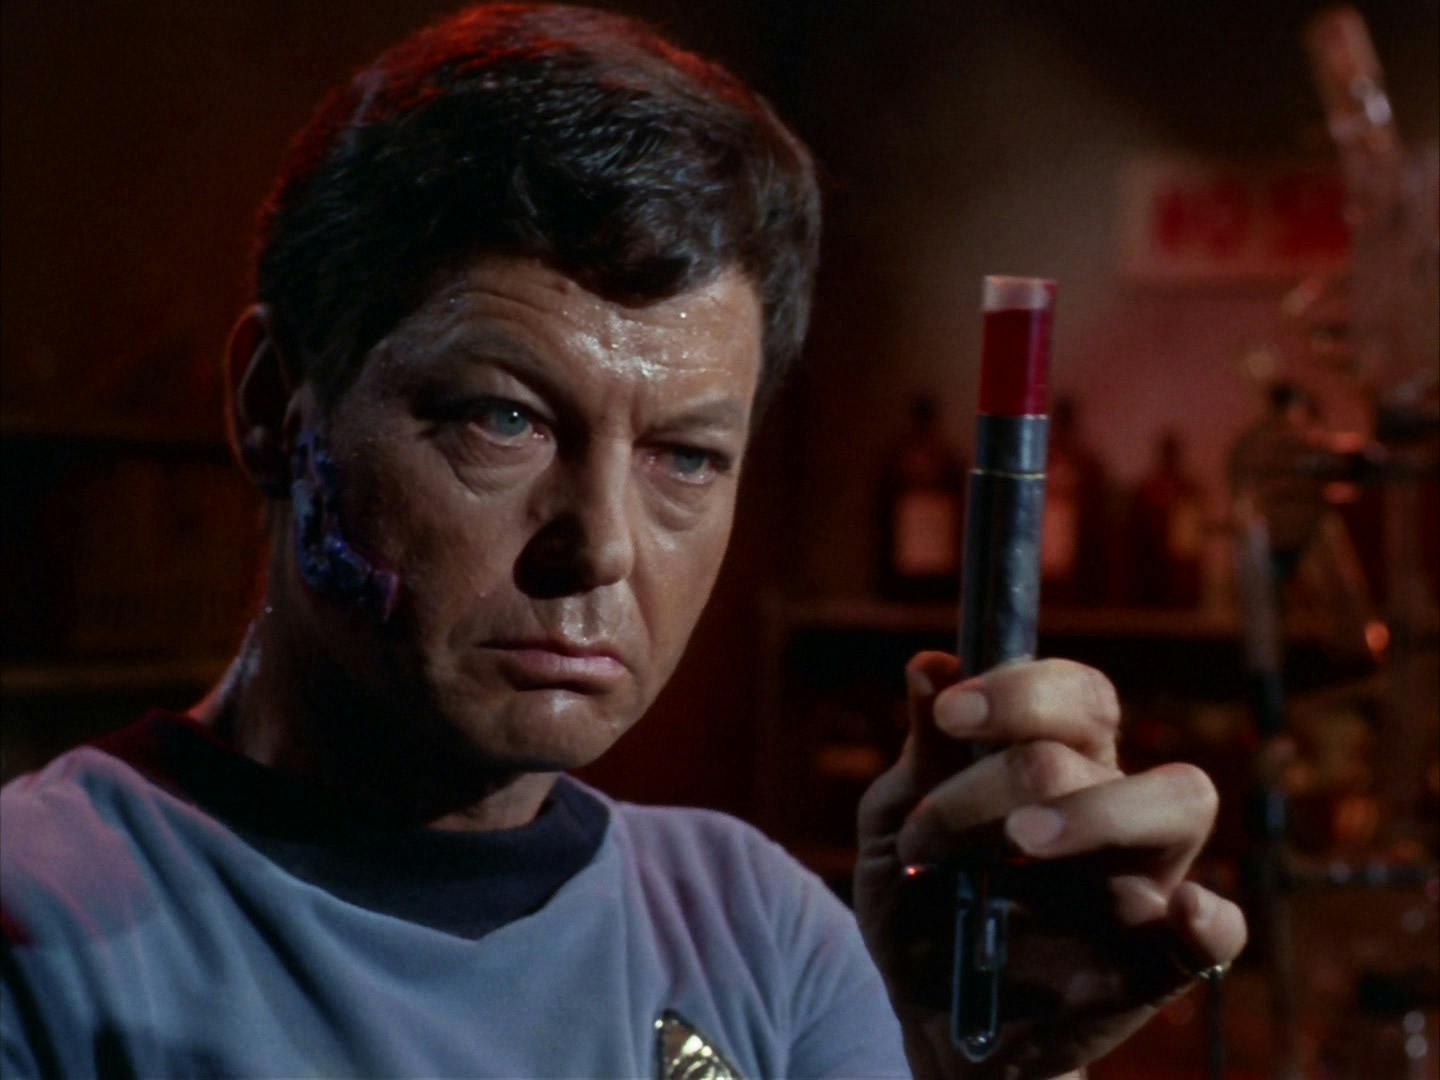 Dr. Leonard 'Bones' McCoy looks at a hypospray filled with a potentially lethal vaccine before testing it on himself before subjecting anyone else to it in 'Miri'